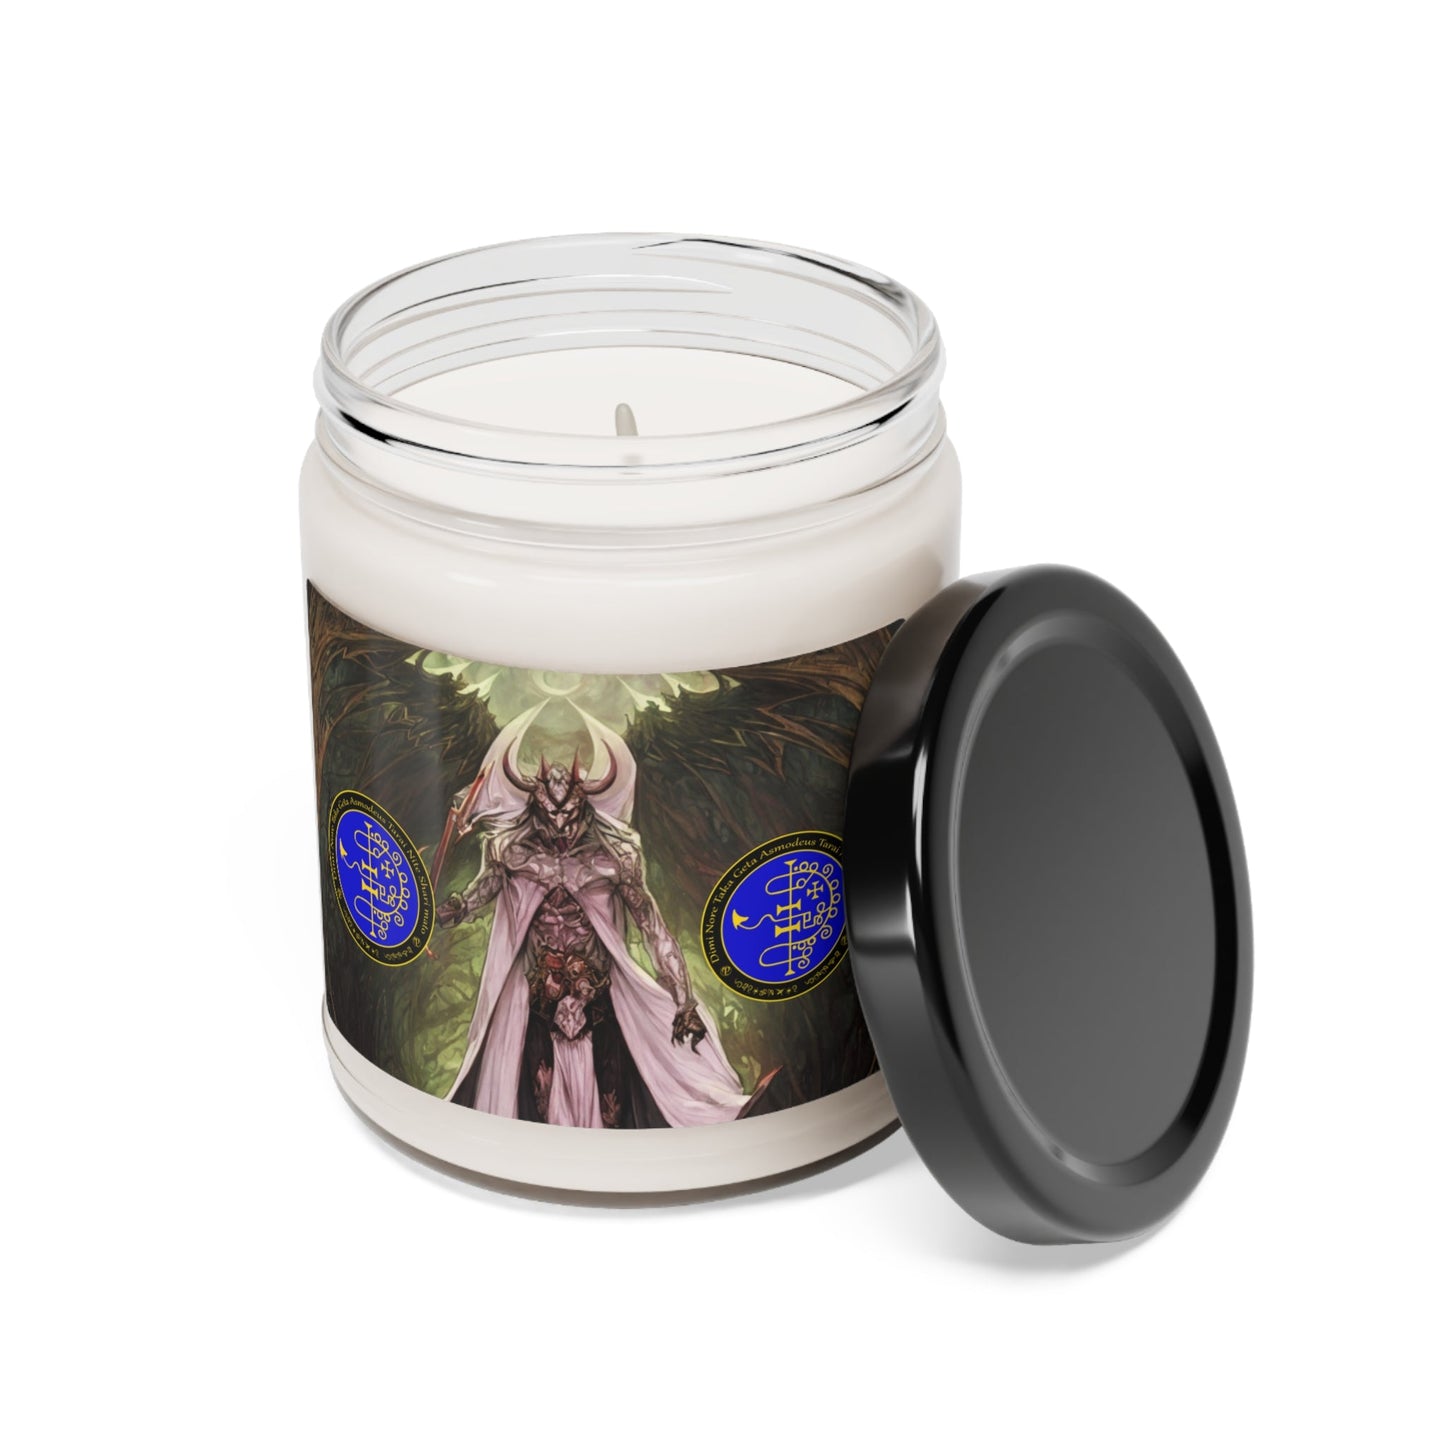 Demon-Asmodeus-oltar-Soy-Scented-Soy Candle-for-Gamble-related-offerings-rituals-inicijations-or-praying-and-meditation-12